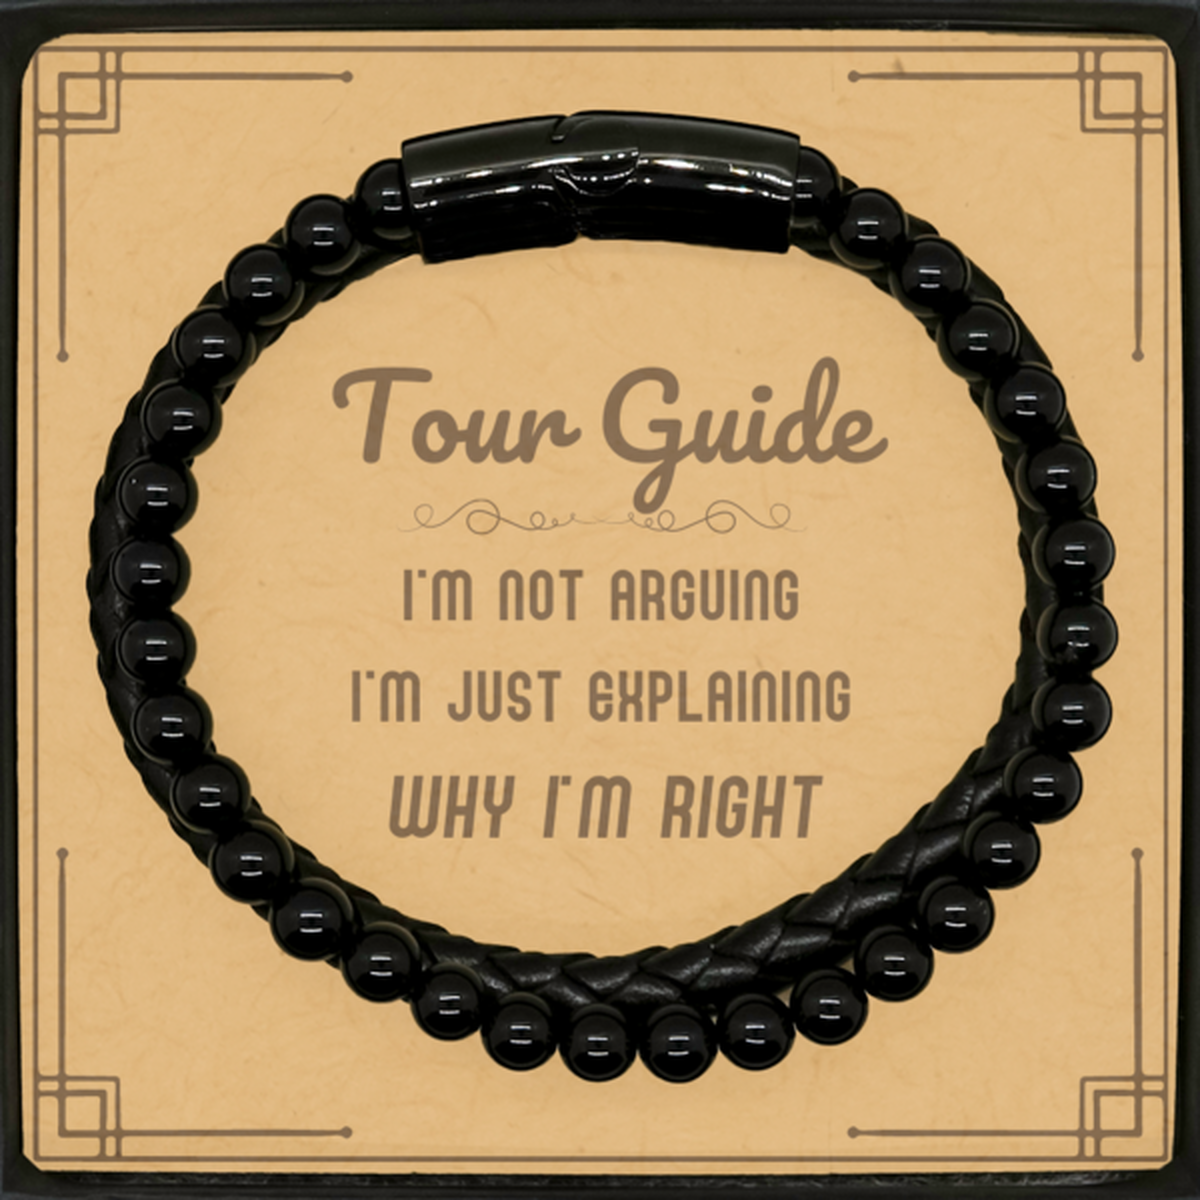 Tour Guide I'm not Arguing. I'm Just Explaining Why I'm RIGHT Stone Leather Bracelets, Funny Saying Quote Tour Guide Gifts For Tour Guide Message Card Graduation Birthday Christmas Gifts for Men Women Coworker